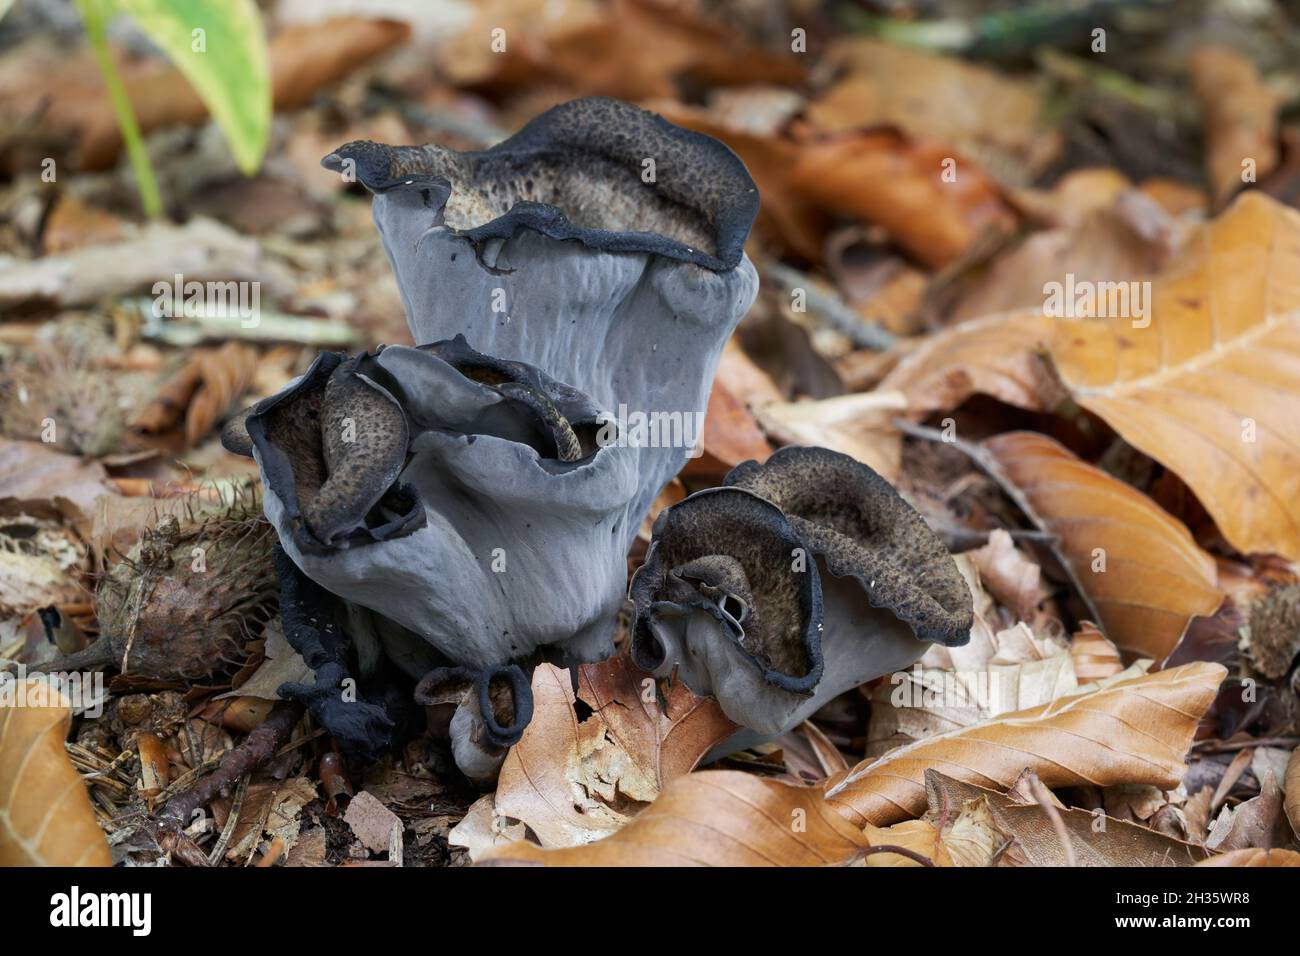 Edible mushroom Craterellus cornucopioides in beech forest. Known as black chanterelle or black trumpet. Wild dark mushrooms growing in the leaves. Stock Photo